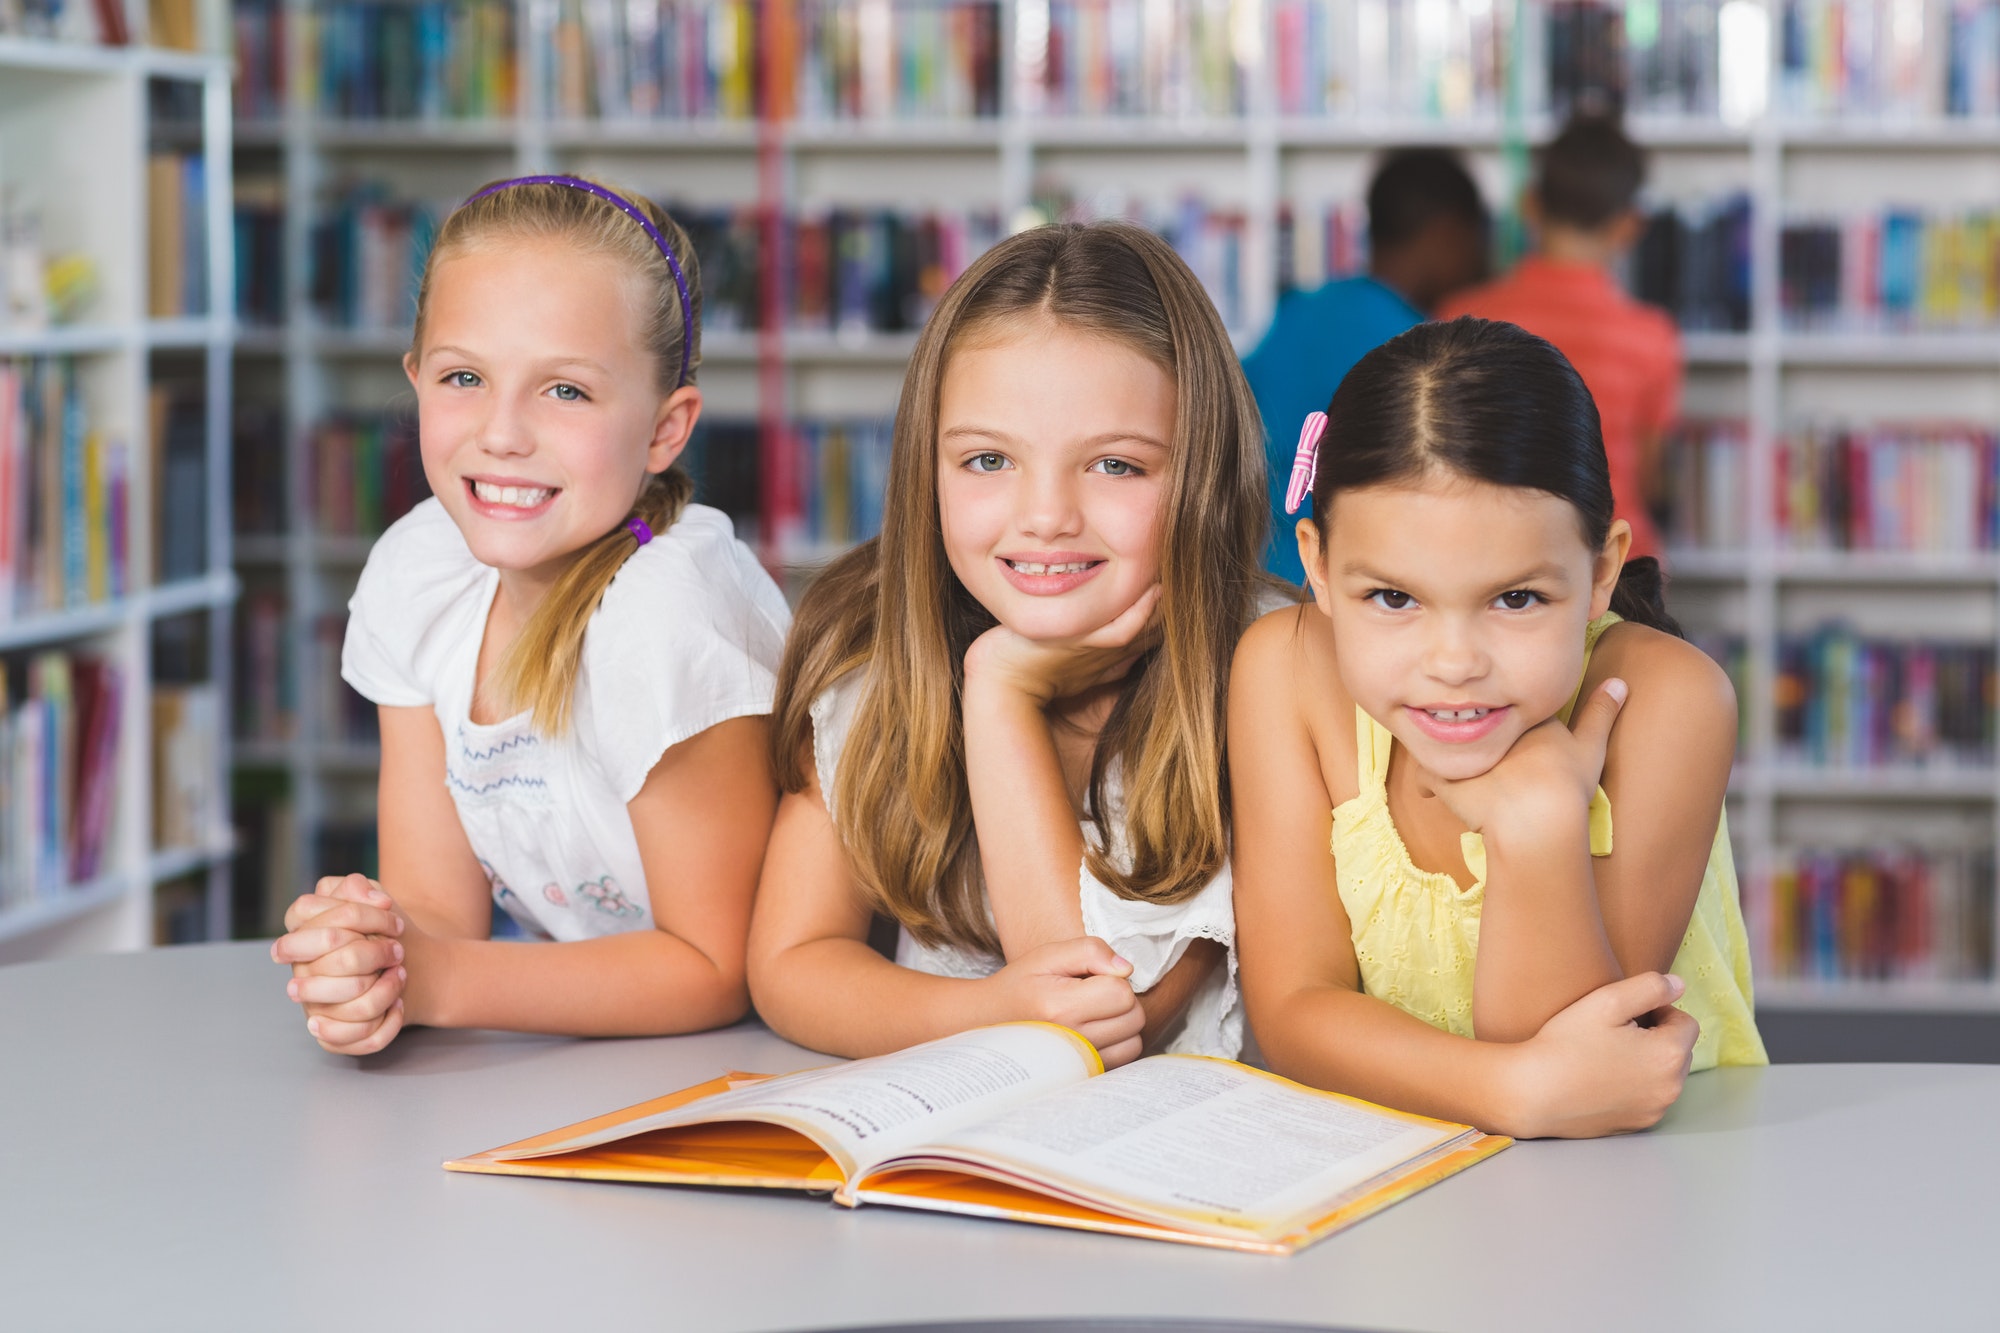 school-kids-reading-book-together-in-library.jpg